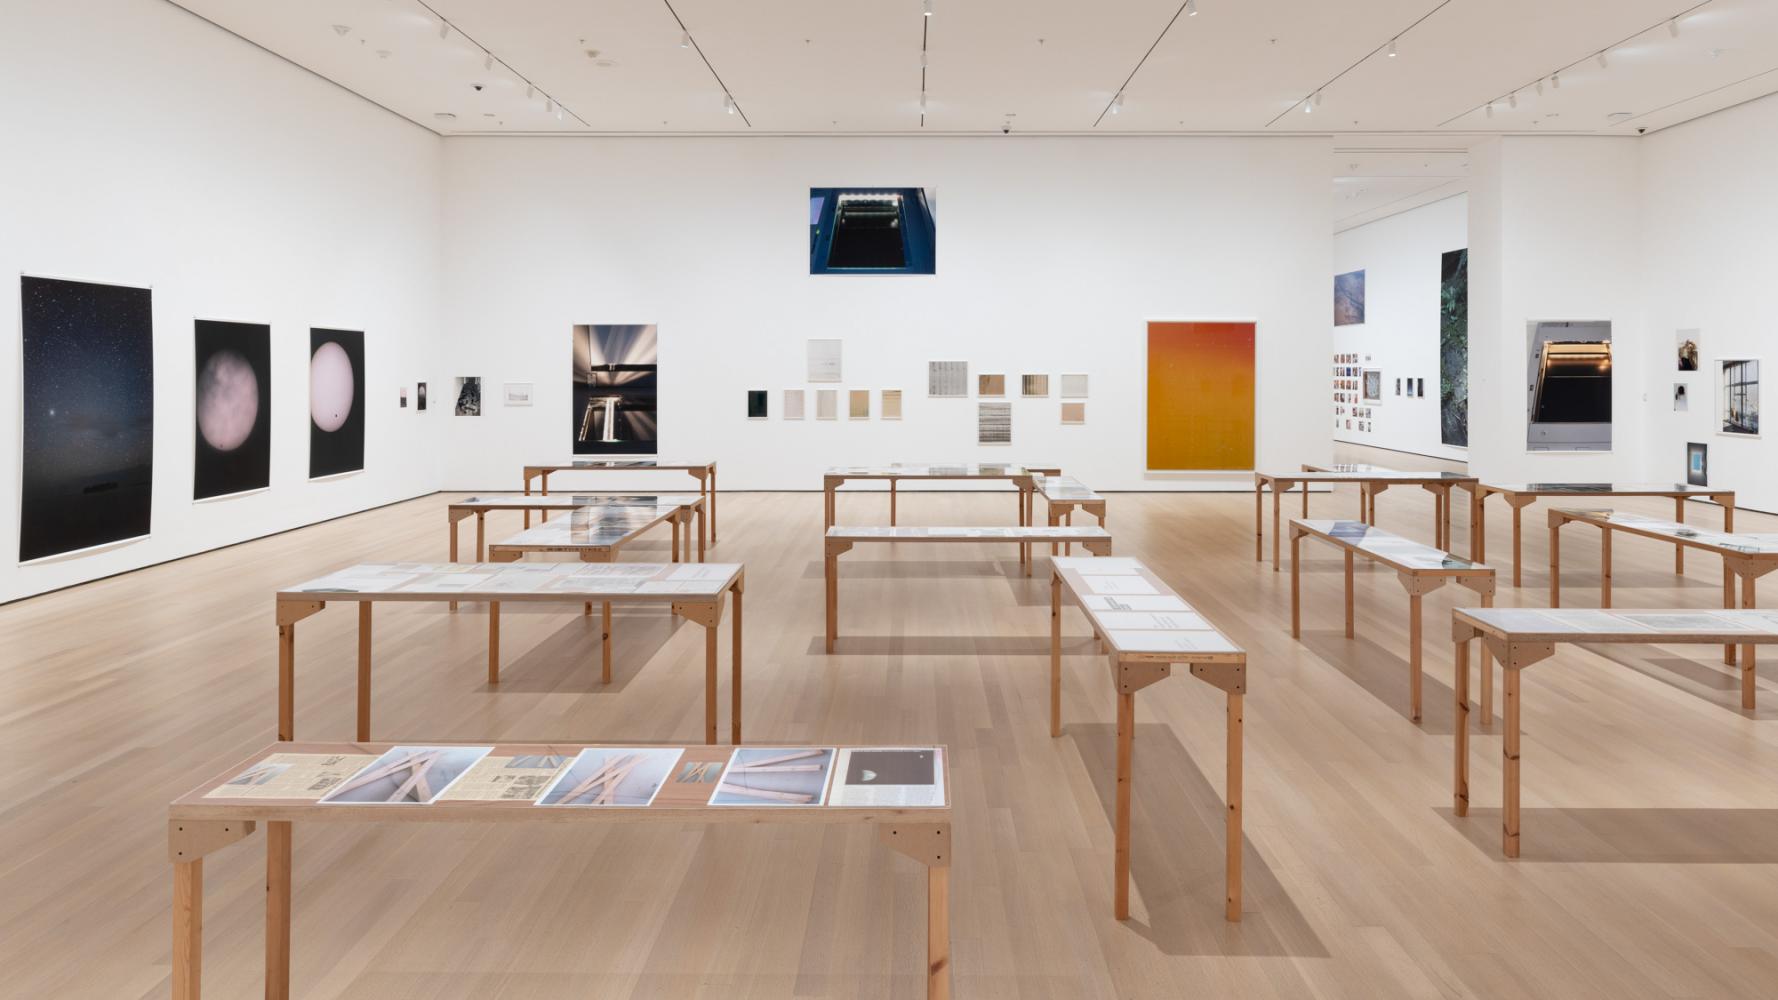 Wolfgang Tillmans "To look without fear", Installationsansicht MoMa, New York, 2022